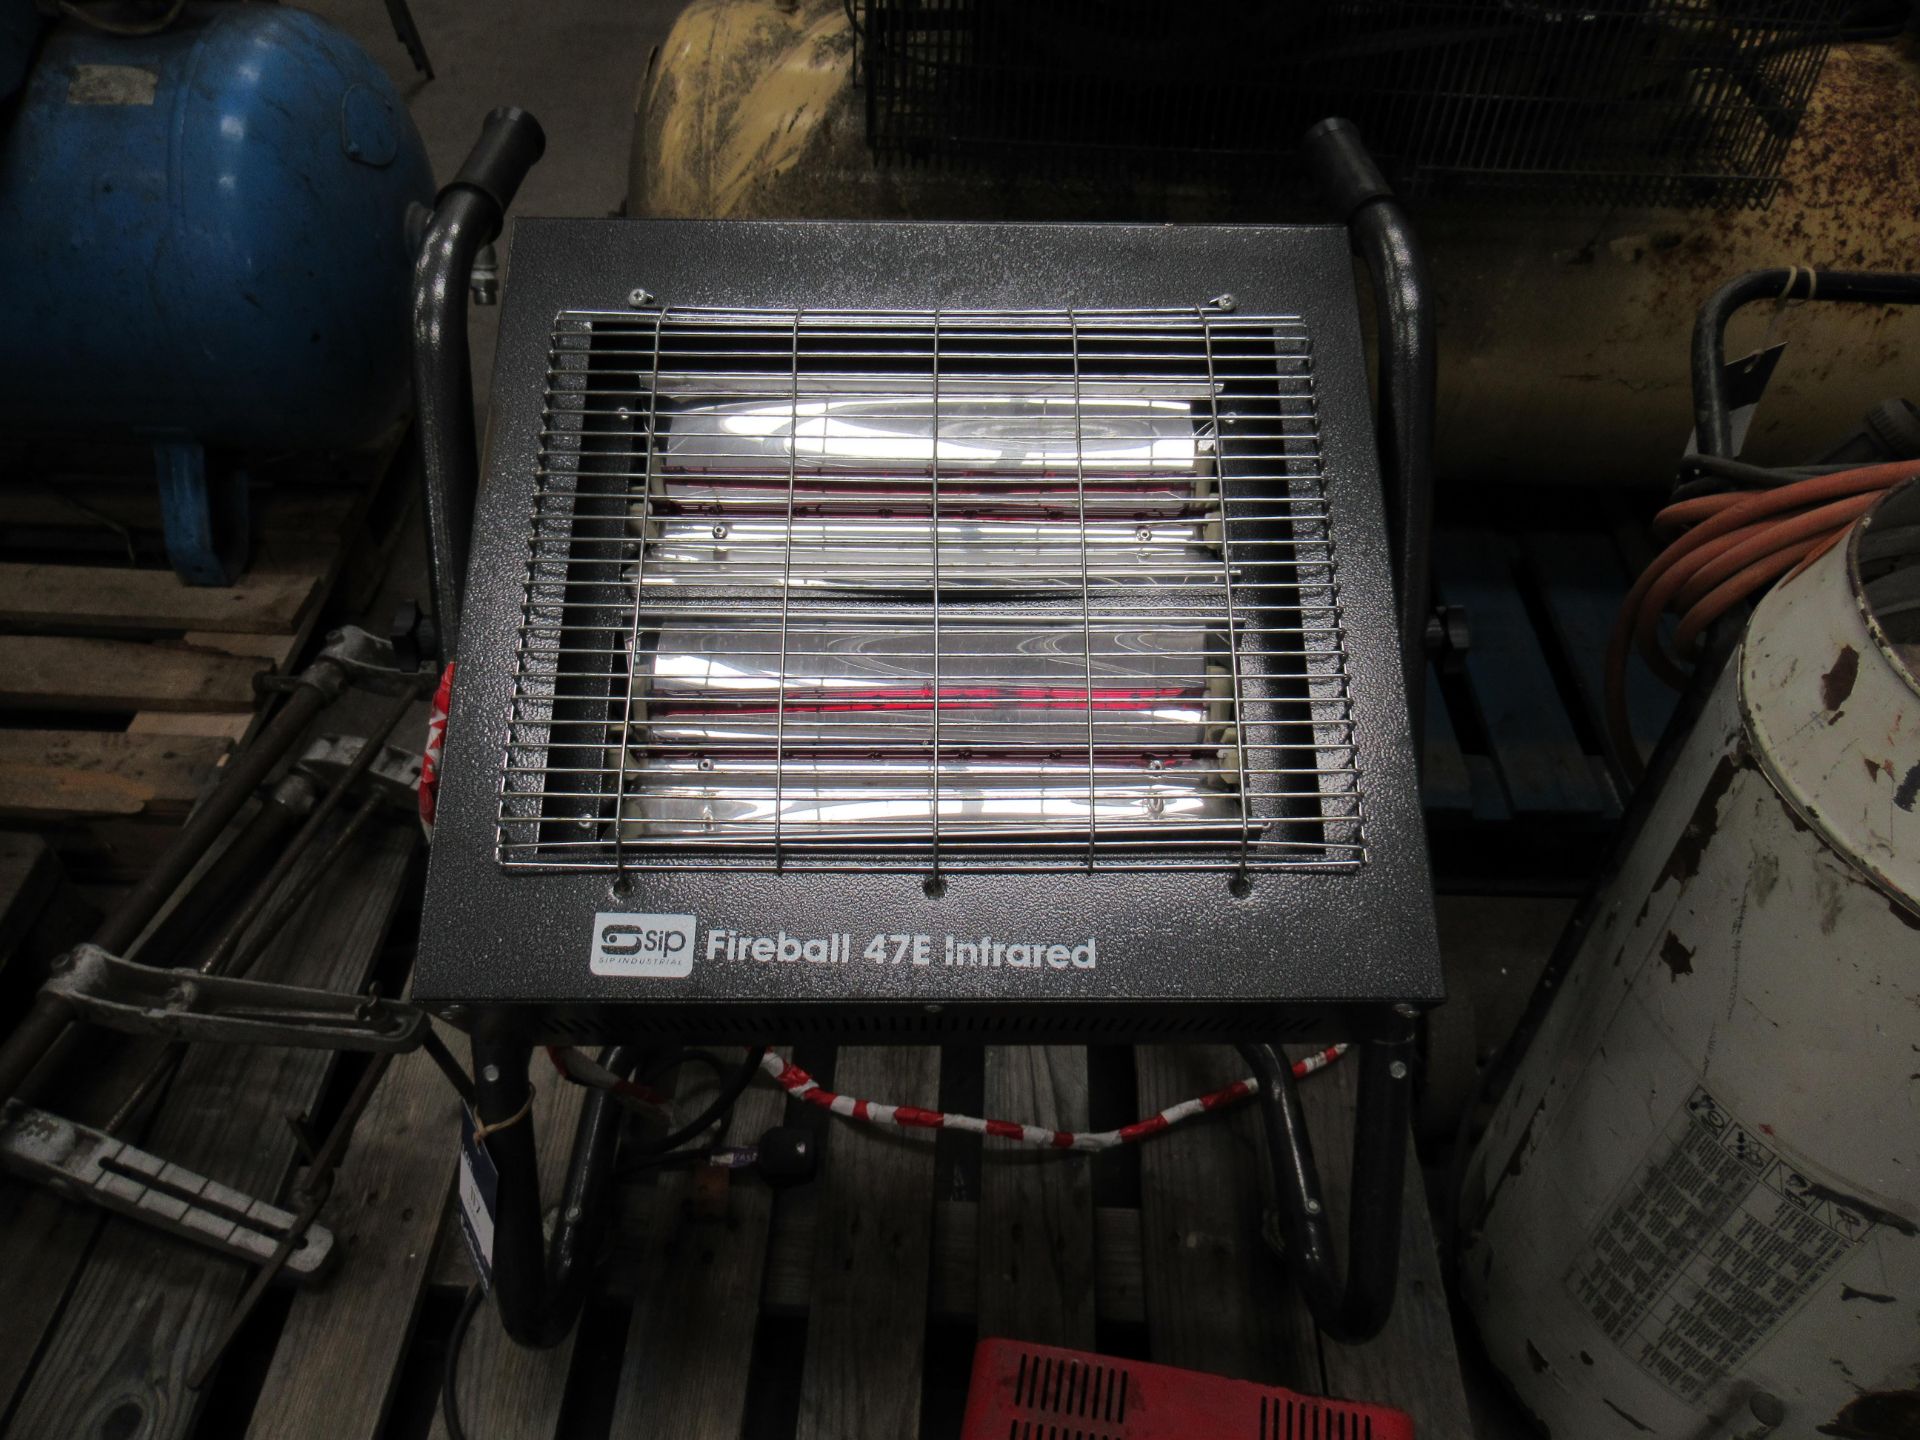 A Fireball 47E infrared heater. SPARES OR REPAIRS